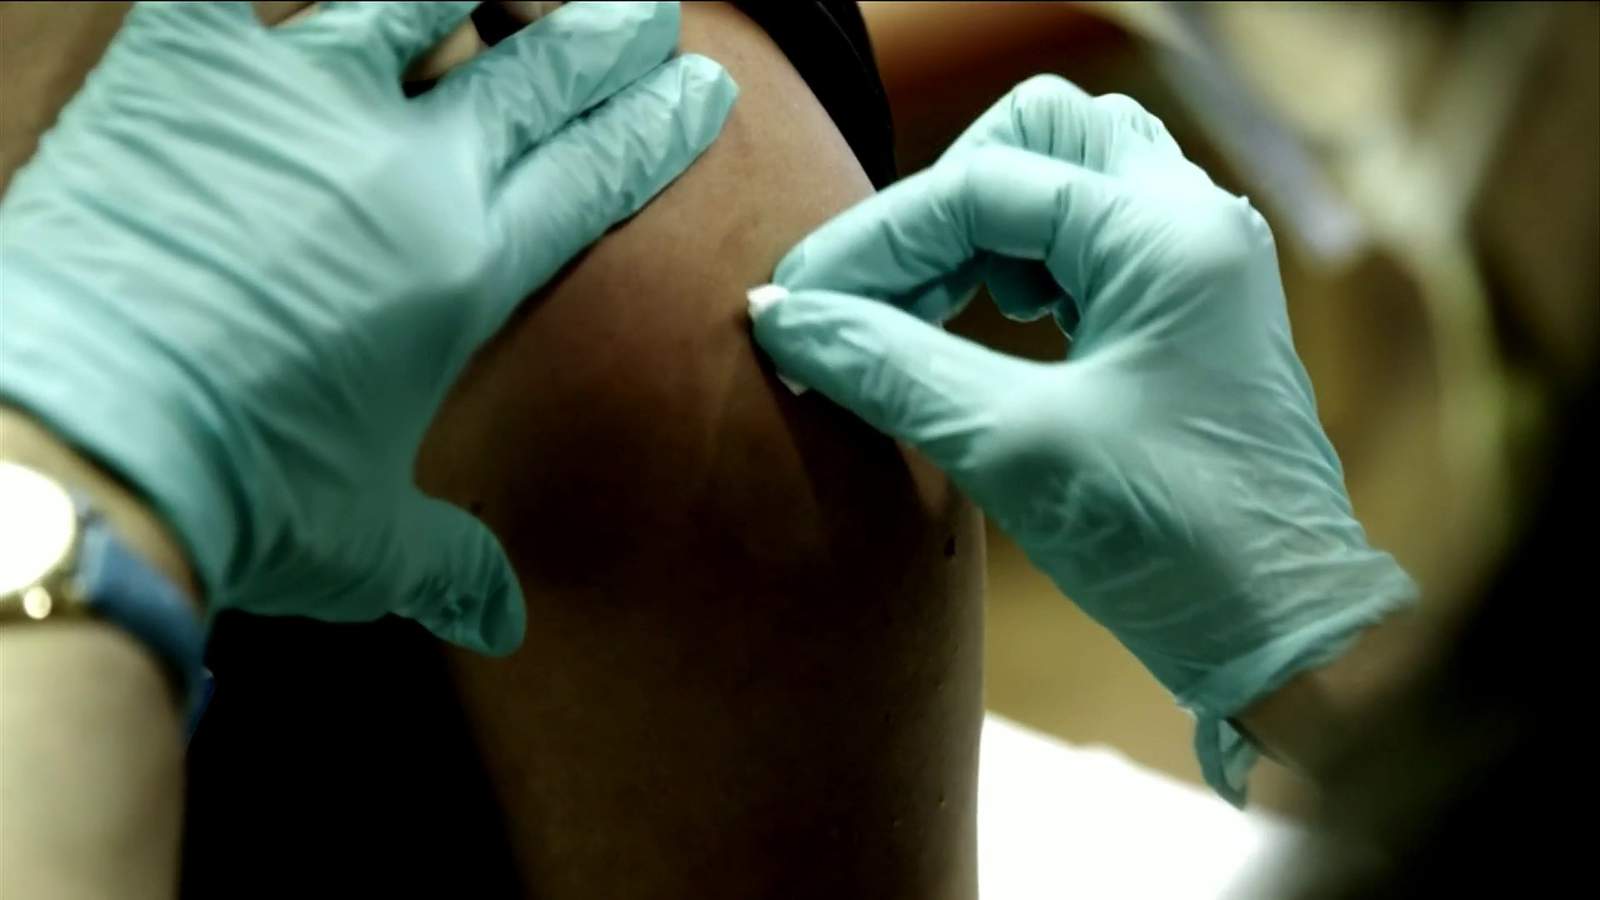 Some Black communities in Florida have no vaccine access